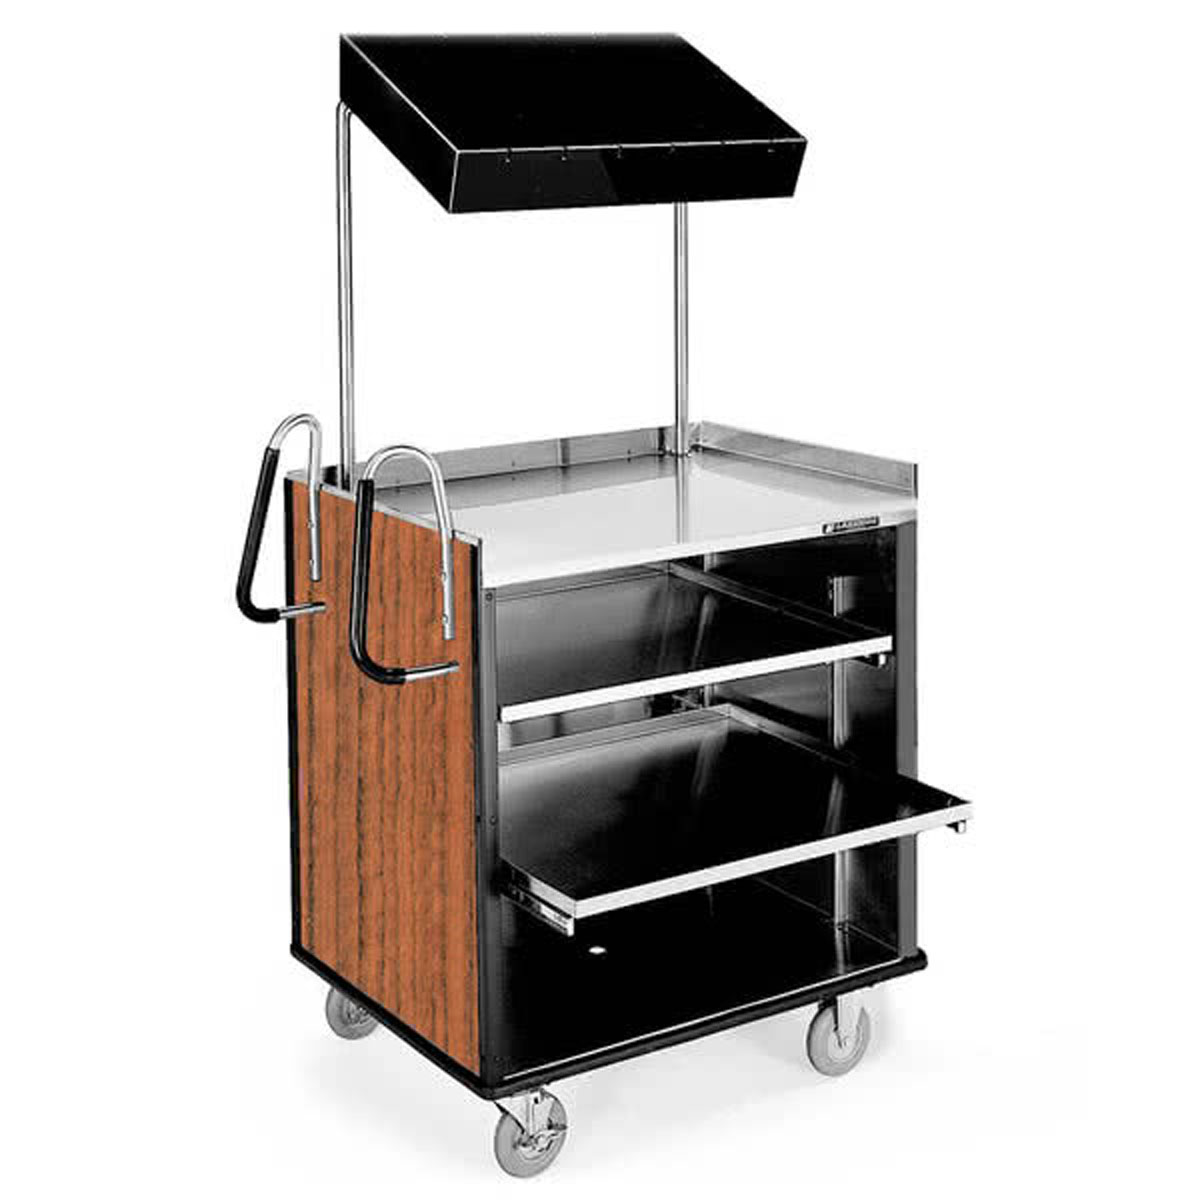 Lakeside LA660VC Stainless Steel Compact Mart Cart Victorian Cherry Laminate Finish